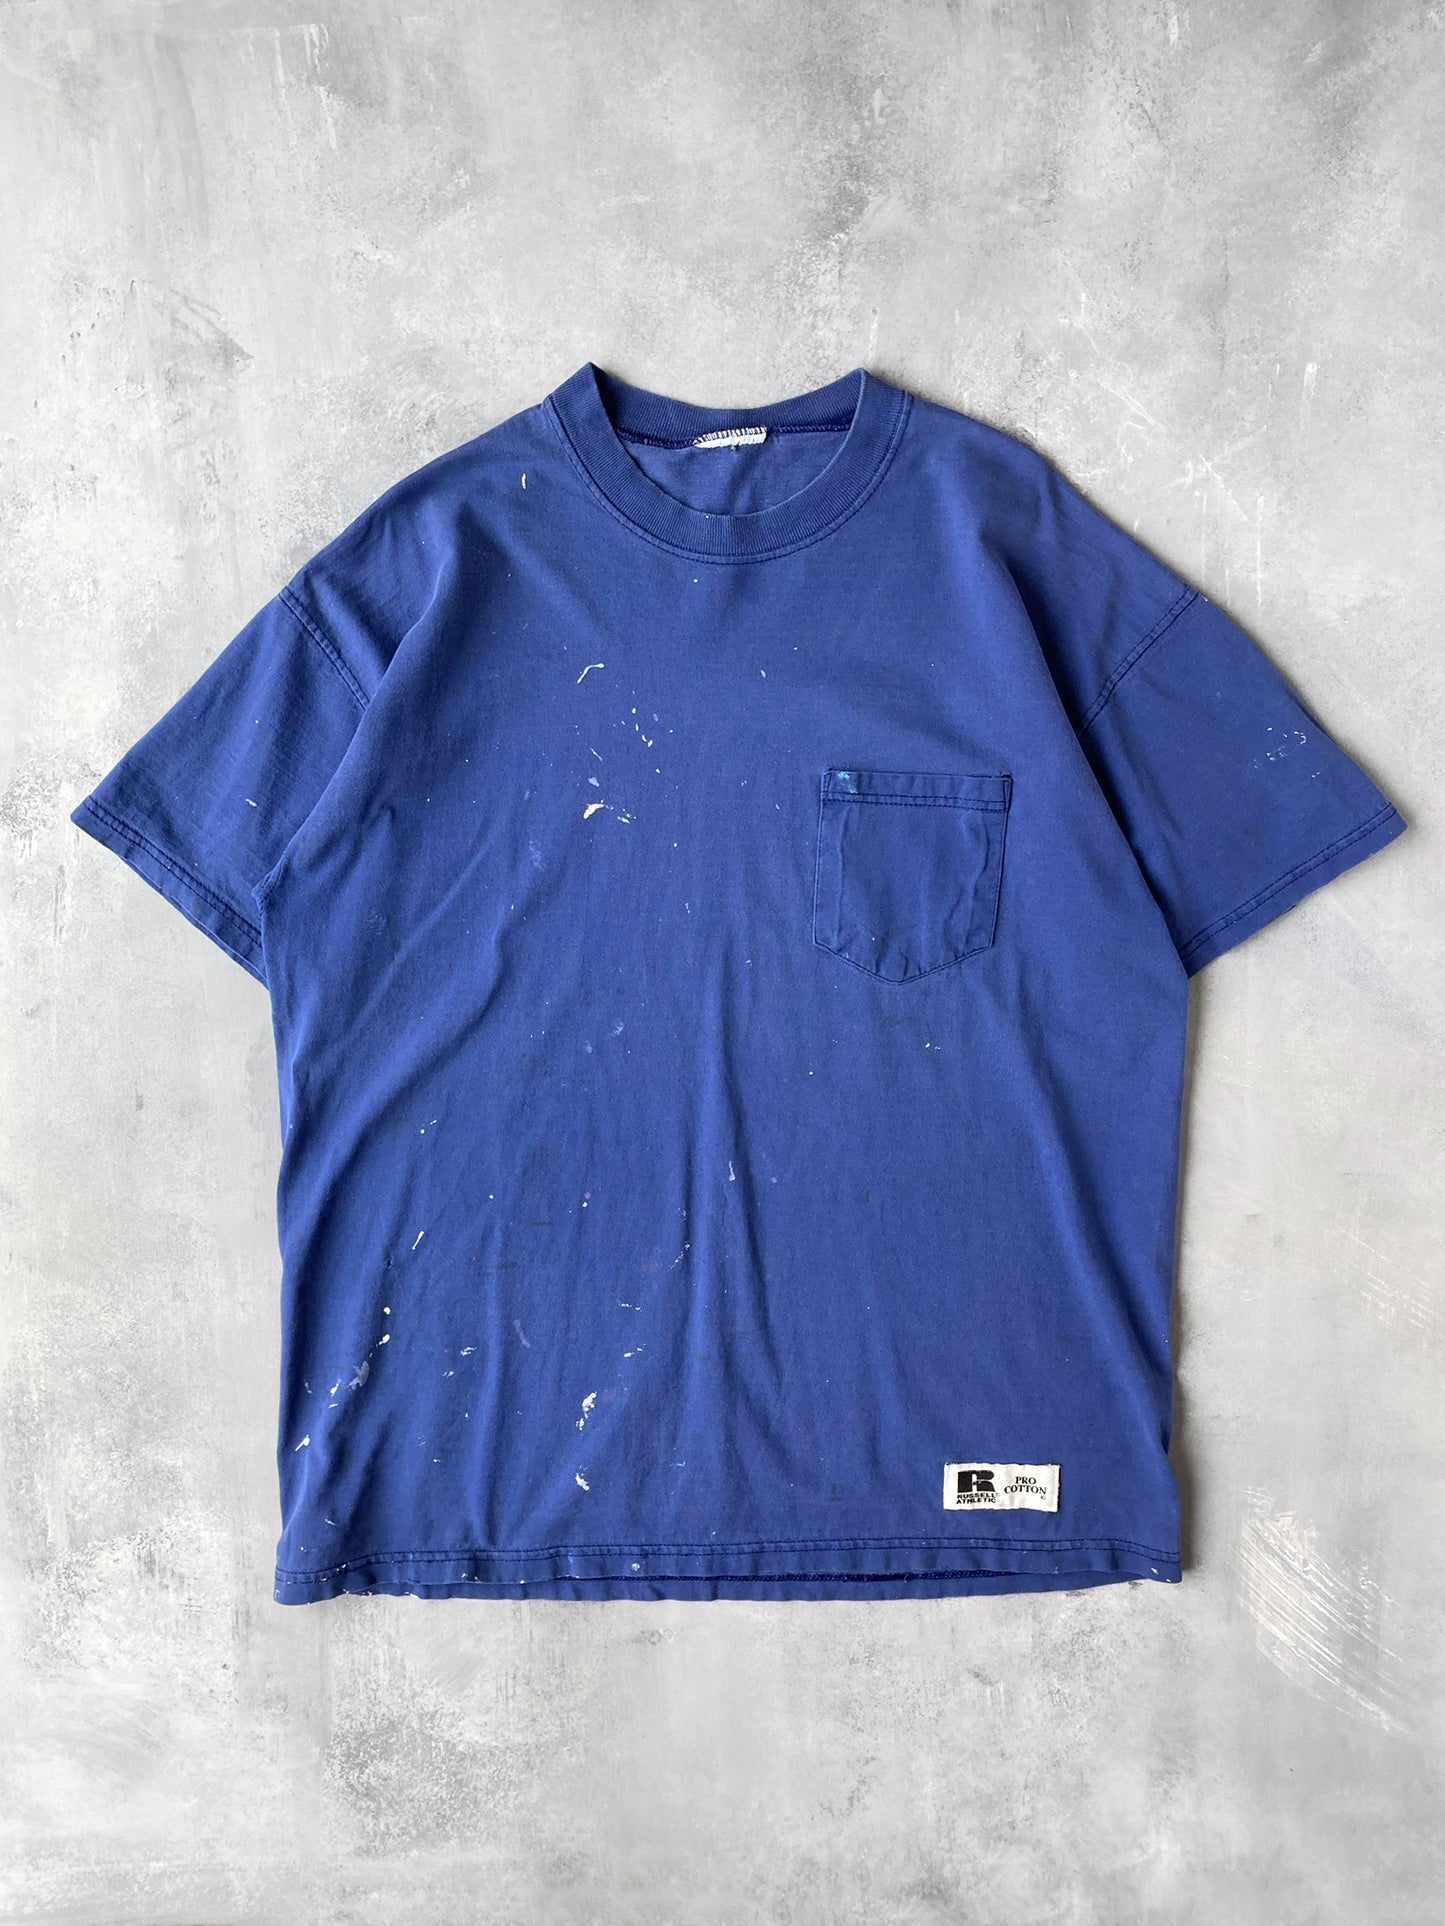 Thrashed Russell Athletic Pocket T-Shirt '90's - XL